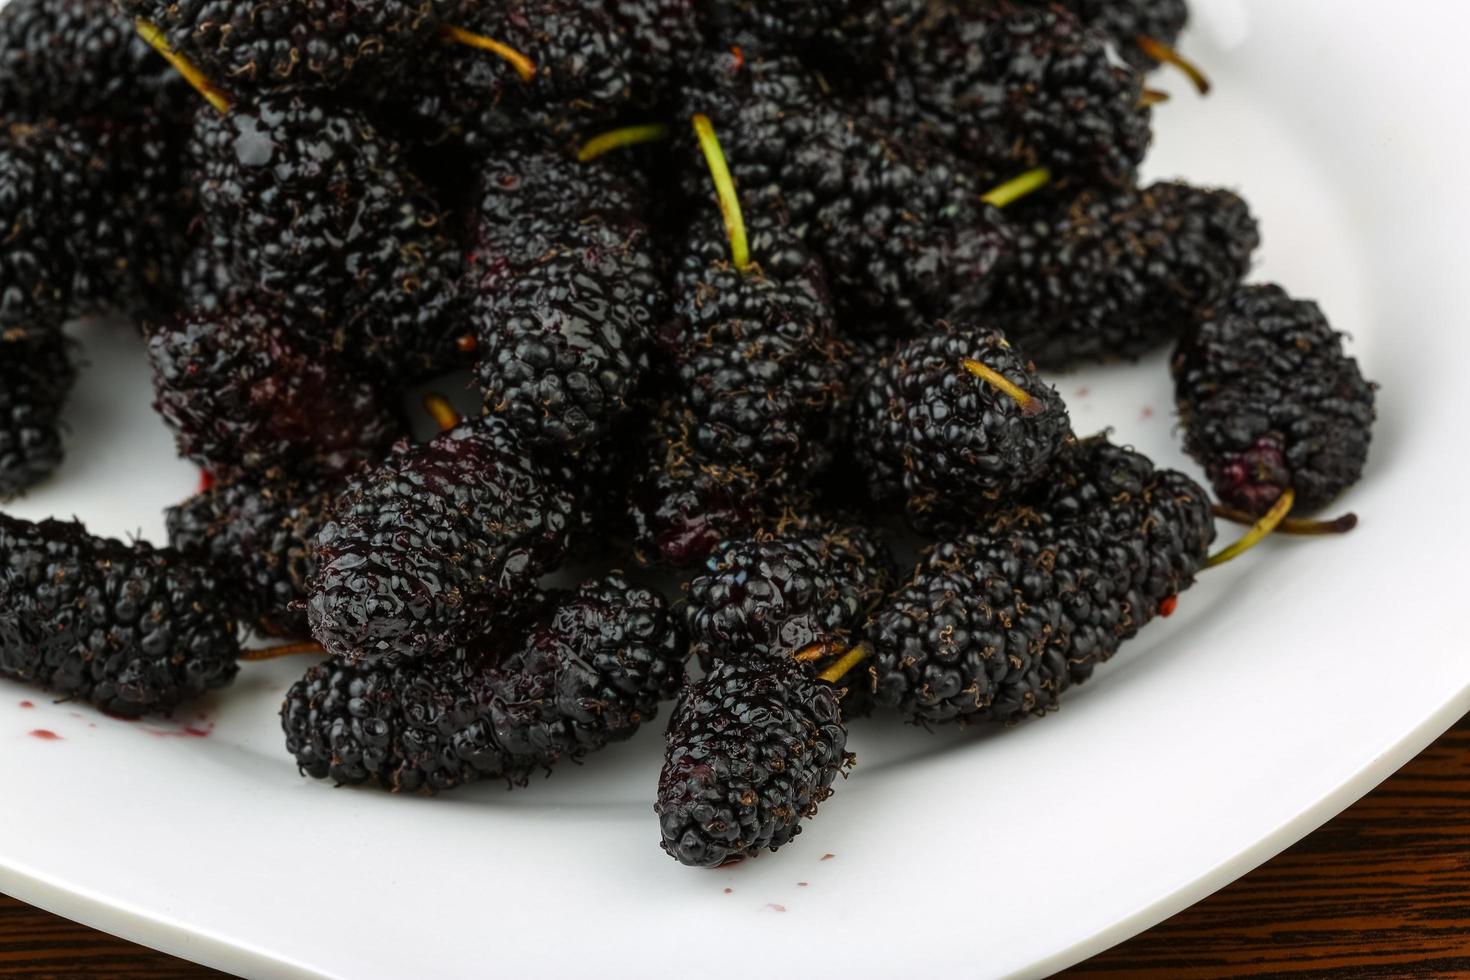 Mulberry on the plate photo